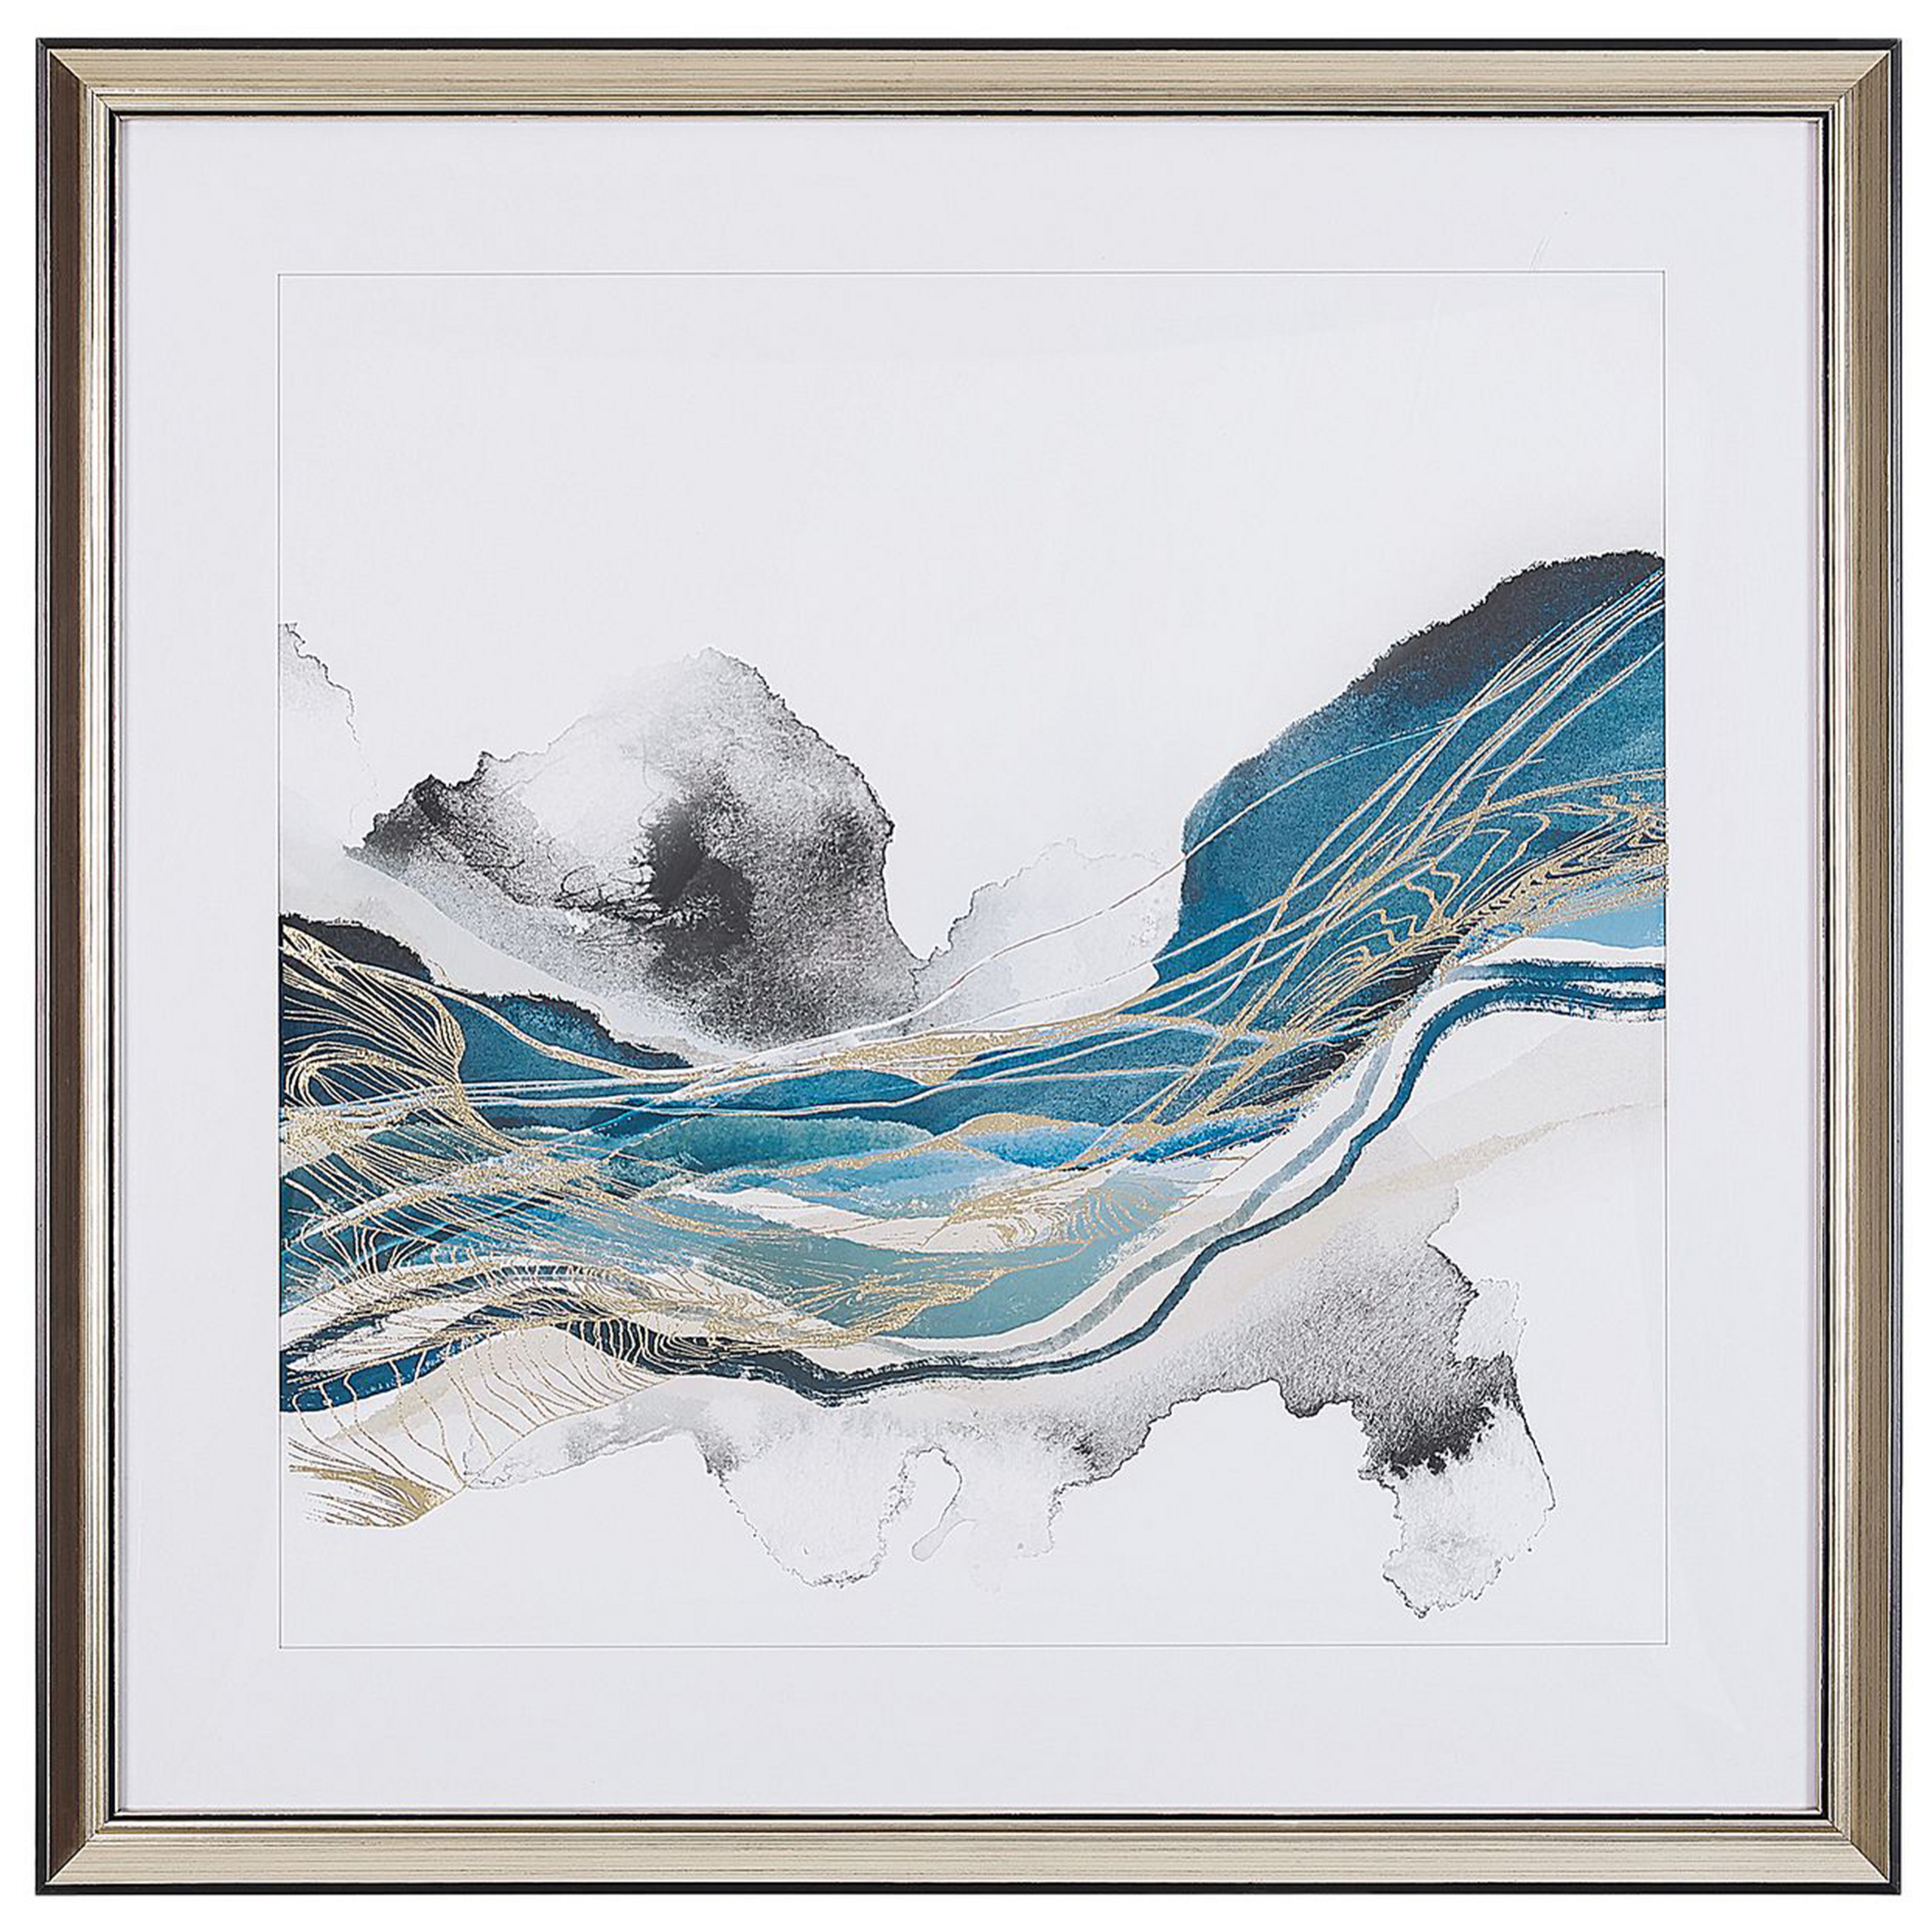 Beliani Framed Wall Art Blue and Grey Print on Paper 60 x 60 cm Passe-partout Frame Abstract Theme Material:Paper Size:4x60x60